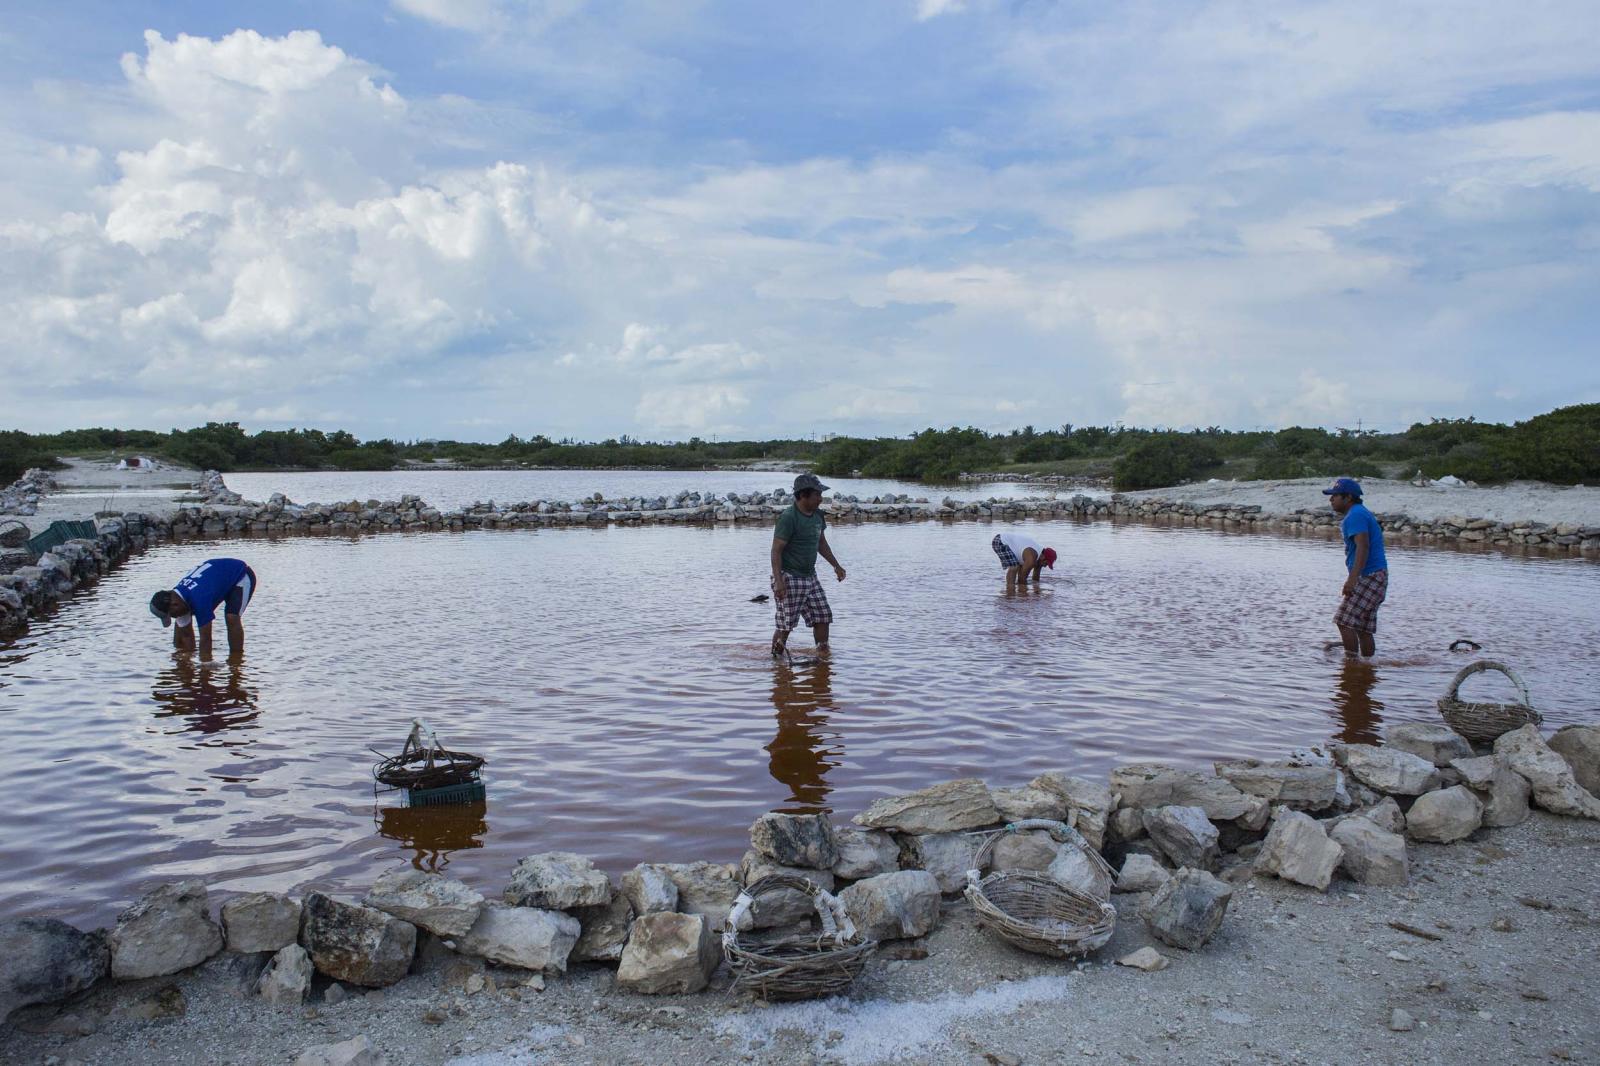 Workers during the salt harvest inside a pond in Xtamp&uacute;, Yucat&aacute;n state, Mexico, on Saturday, October 26, 2019. Photographer: Koral Carballo/Bloomberg